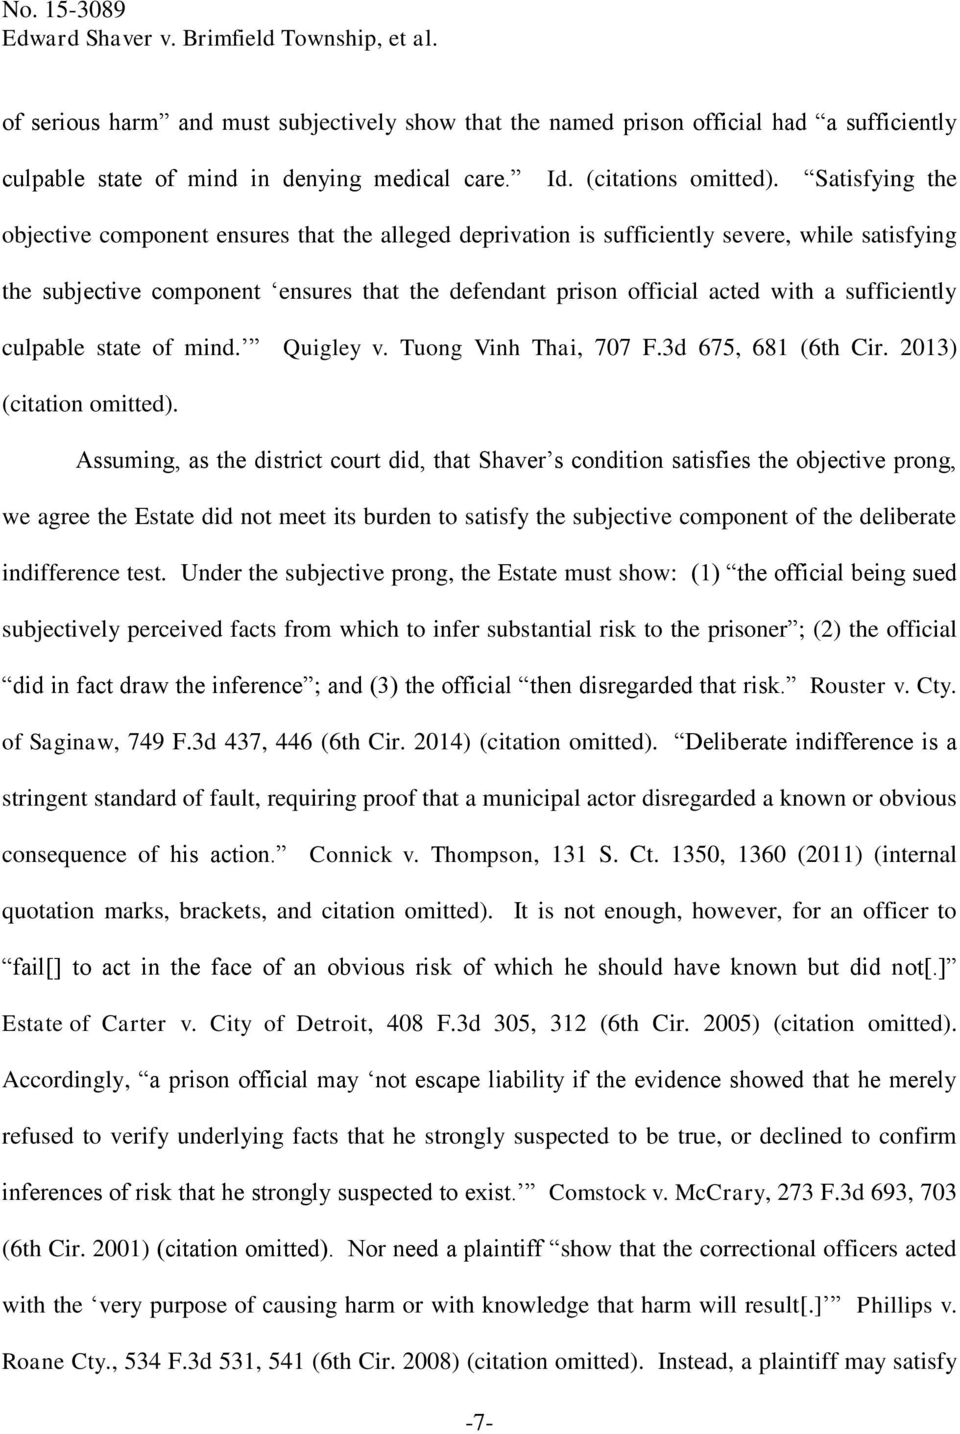 sufficiently culpable state of mind. Quigley v. Tuong Vinh Thai, 707 F.3d 675, 681 (6th Cir. 2013 (citation omitted.